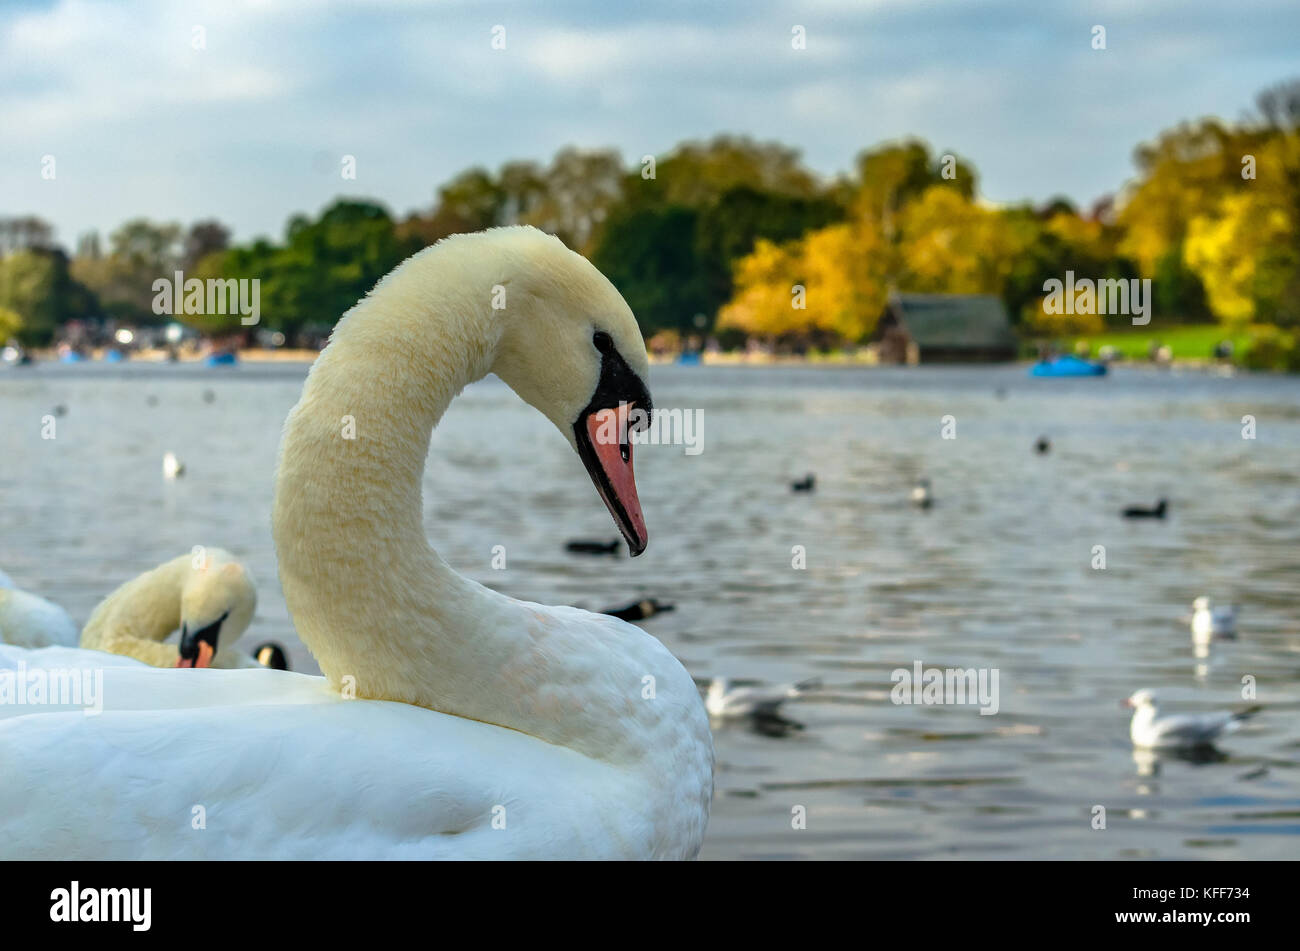 A swan and water birds onan the lake in autumn Stock Photo